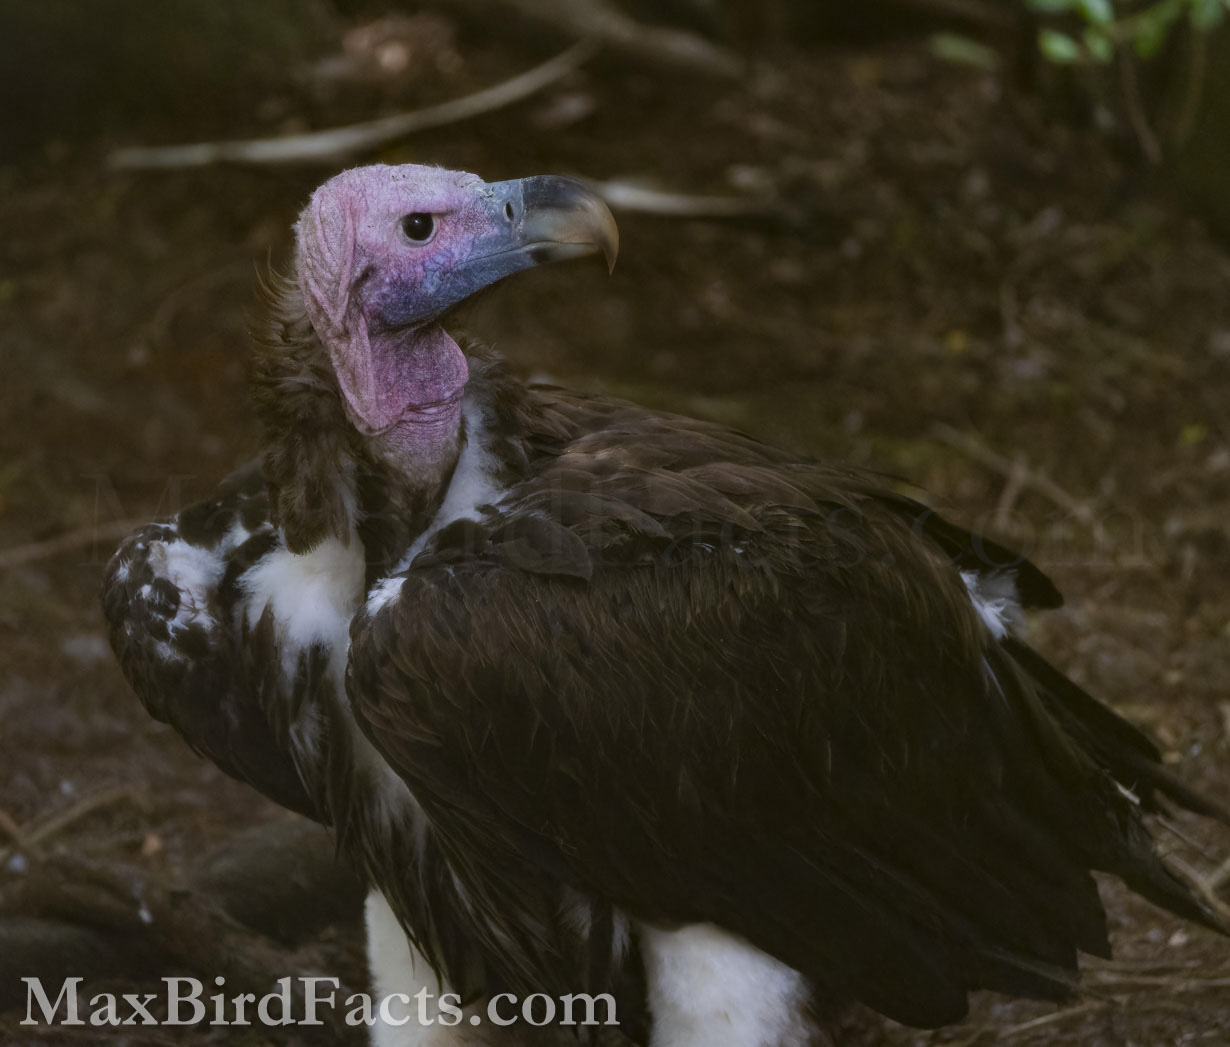 Another behemoth vulture from the African continent, the Lappet-faced Vulture, throws a curious curveball into the reasoning of the Vulture’s bald head. These birds seem to be able to change the vibrancy of their exposed facial skin depending on their mood. When the Vulture needs to show aggression to scare off other scavengers from a carcass, it flushes blood to its face to turn it into a vibrant pink. This change of color can also serve as a non-verbal cue to other species members if that Vulture is defending territory or attempting to display for potential mates. (Jacksonville, FL. 2021)
Vulture_Lifespan_lappet_faced_vulture